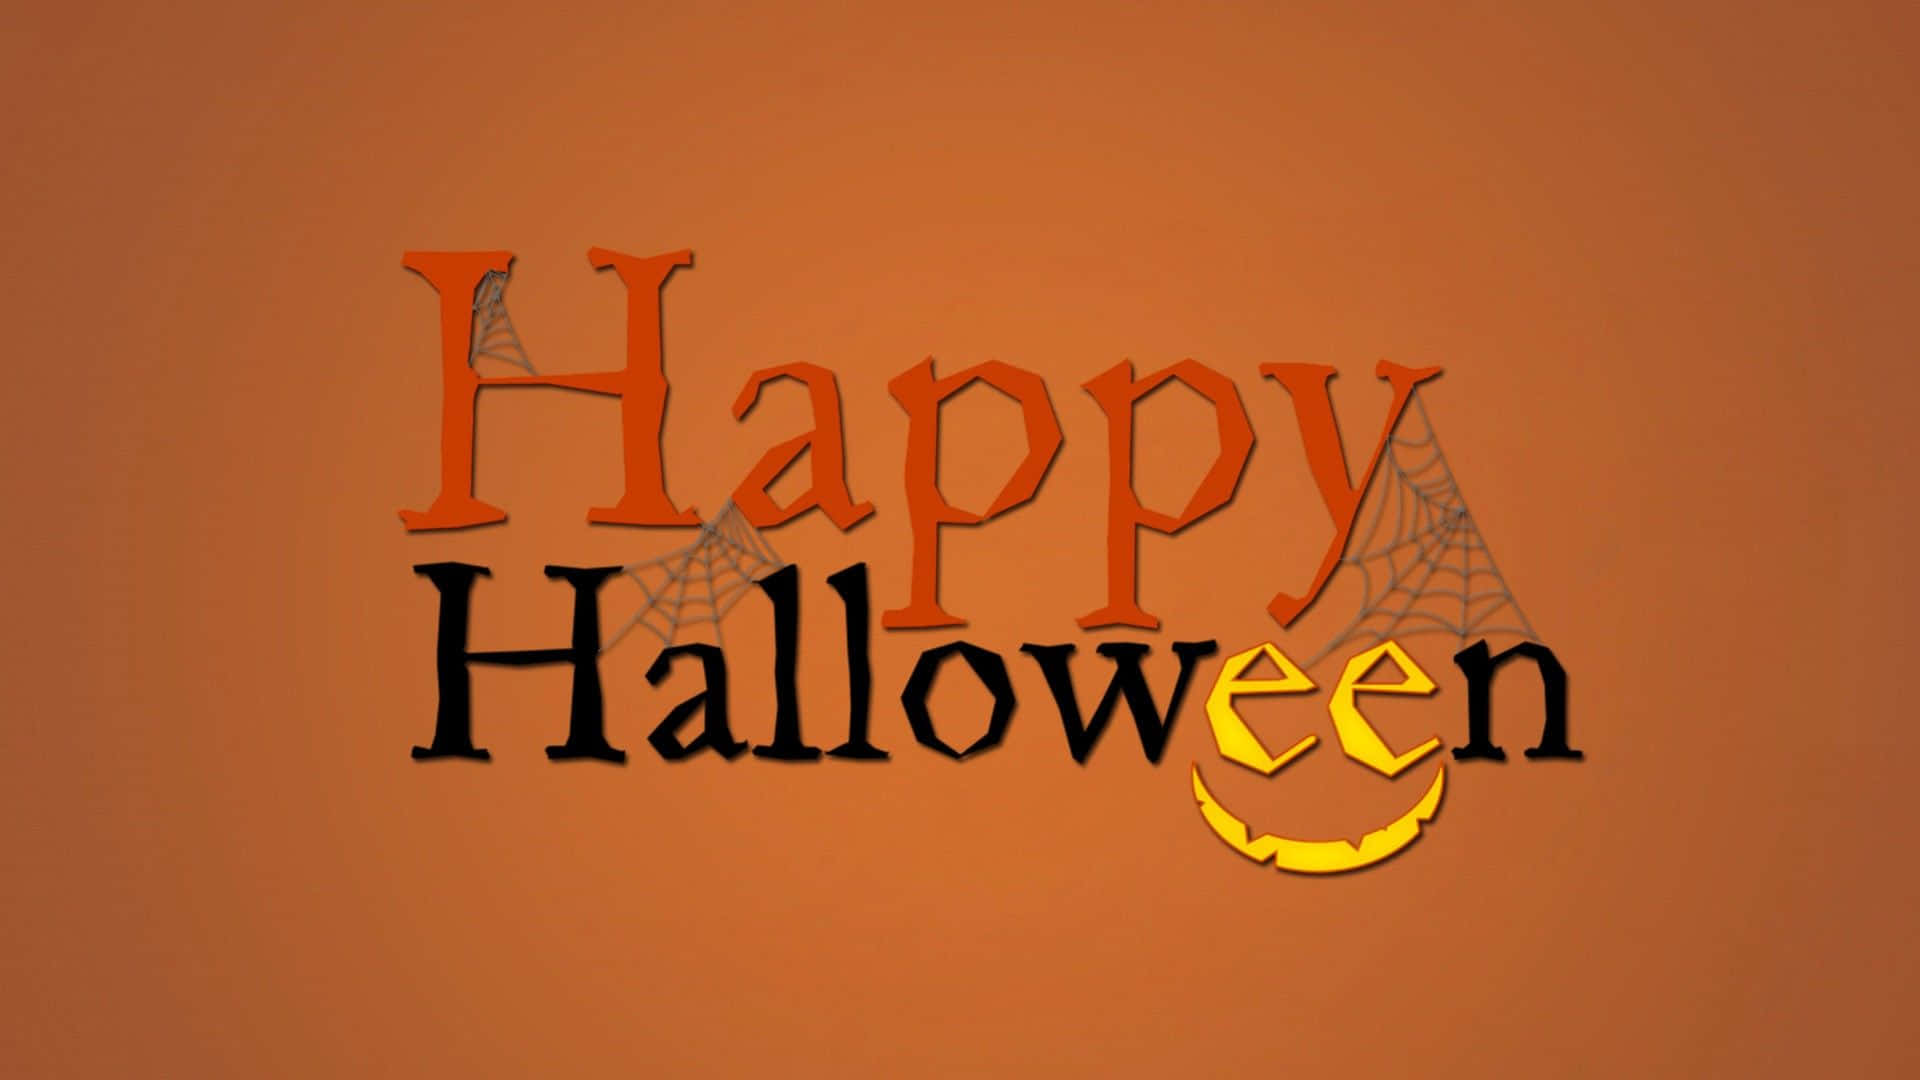 Happy Halloween Greeting With Spider Webs Picture